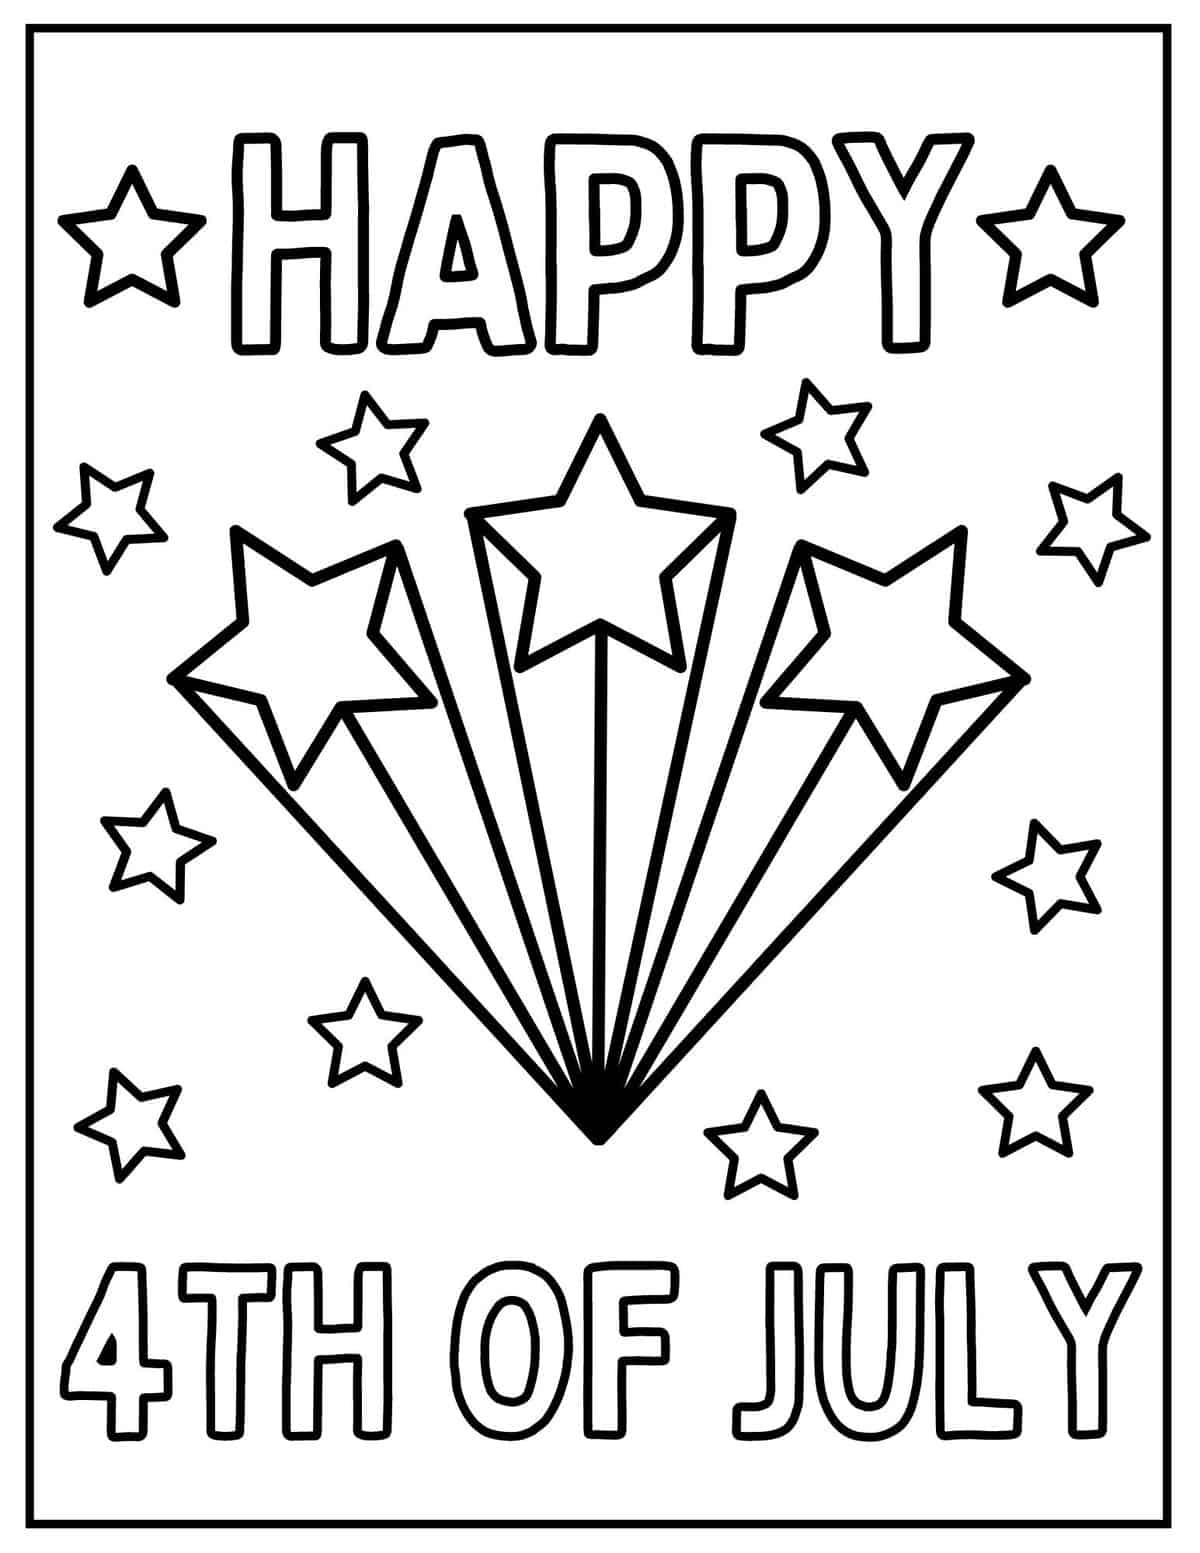 20 Free 4th Of July Coloring Pages Prudent Penny Pincher - Free Printable 4th of July Coloring Pages